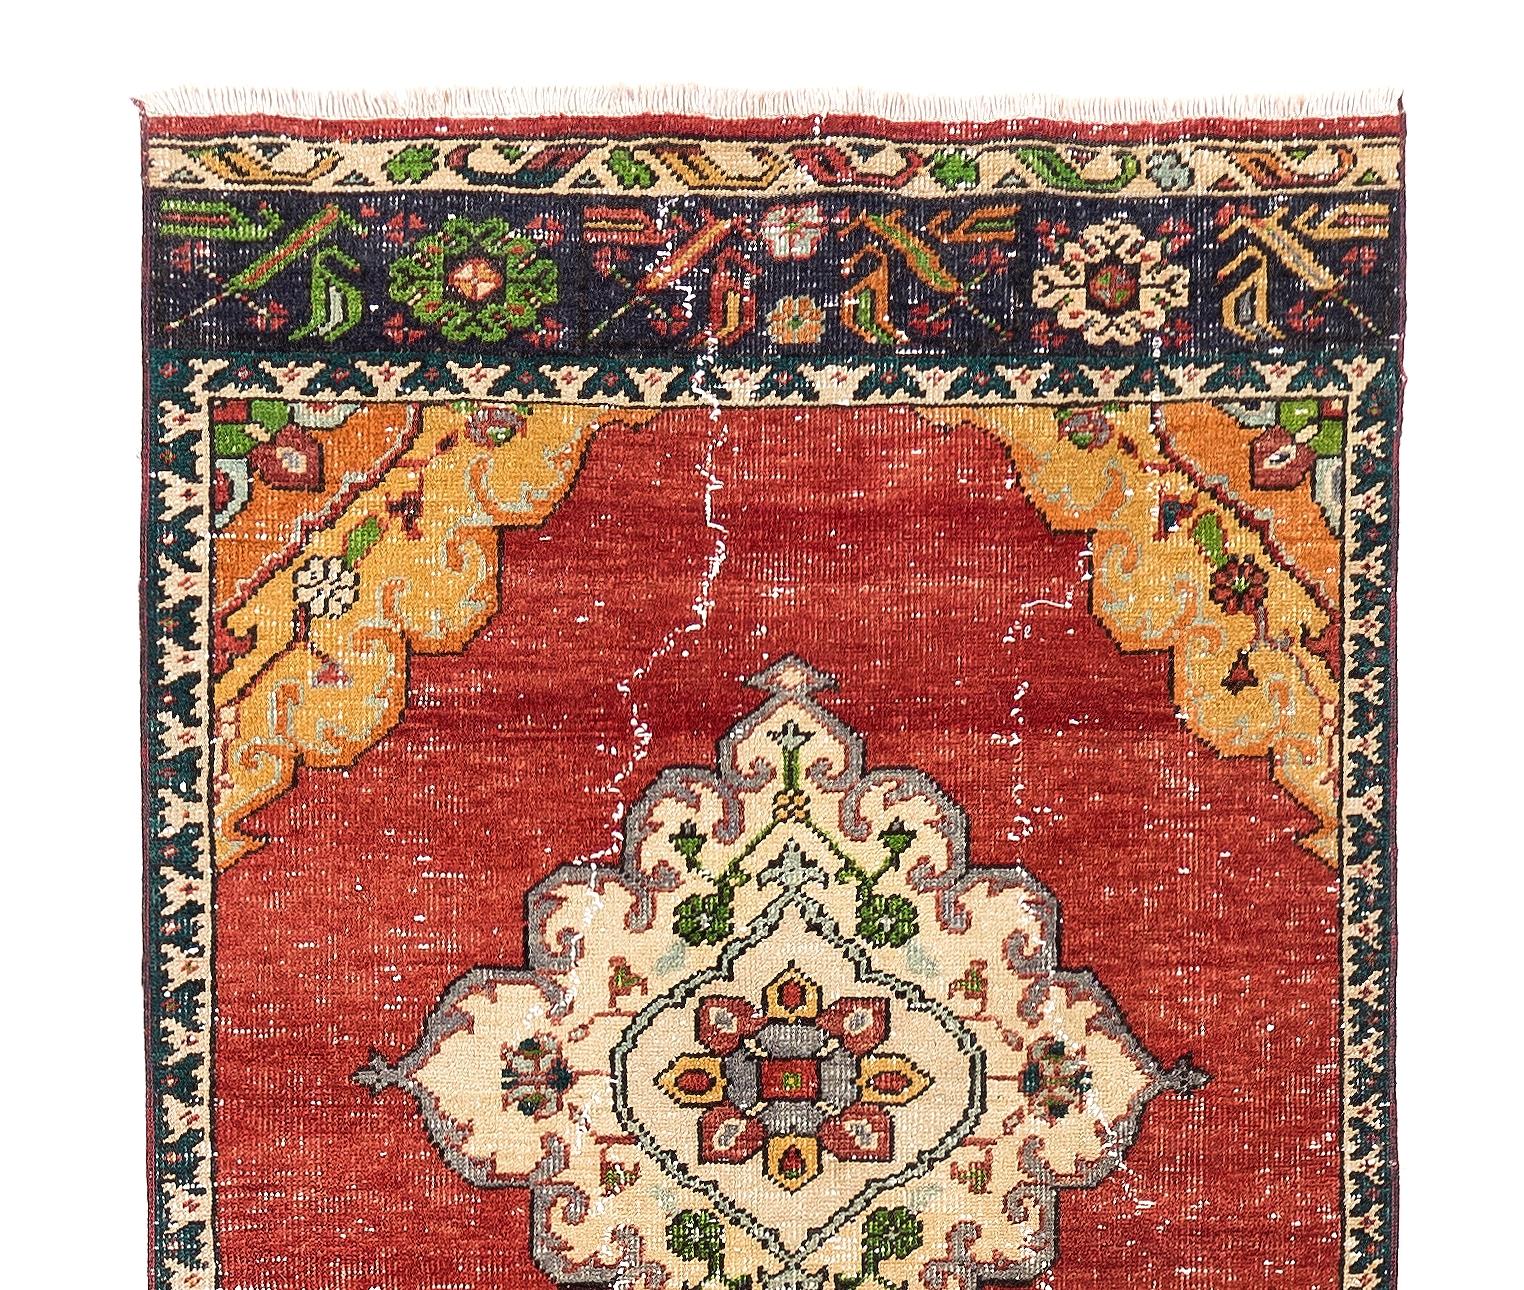 A mid-20th century hand-knotted runner from Turkey in deep, rich colors softened over time with wool pile on wool foundation. Good condition, minor wear consistent with age, sturdy and as clean as a brand new rug. 3.2x12 Ft.